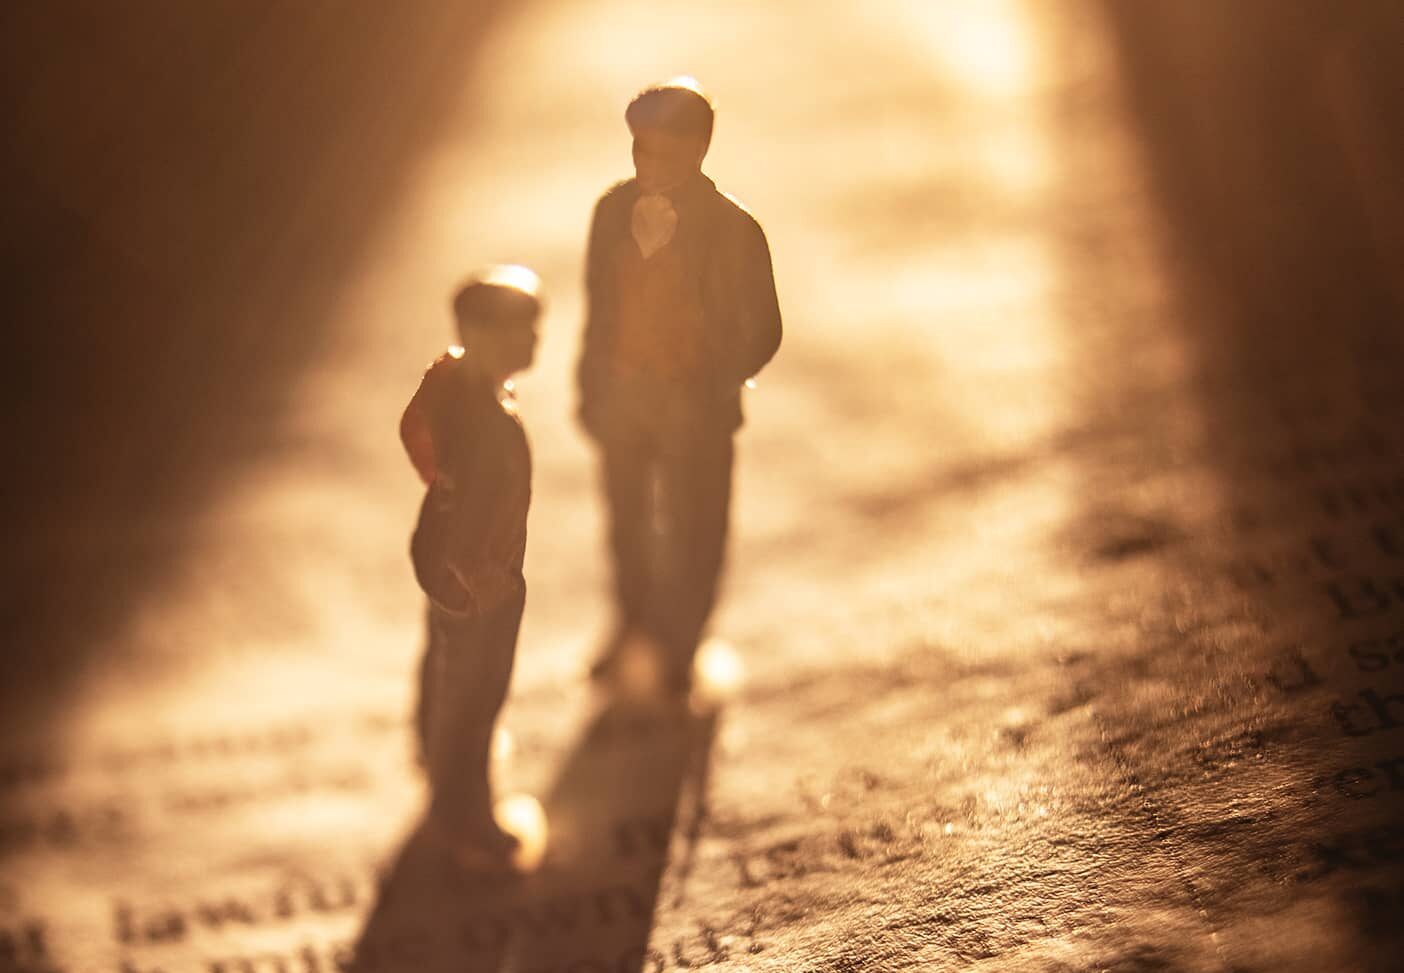 Small figurines of a parent and child standing on a page of scripture bathed in golden light.